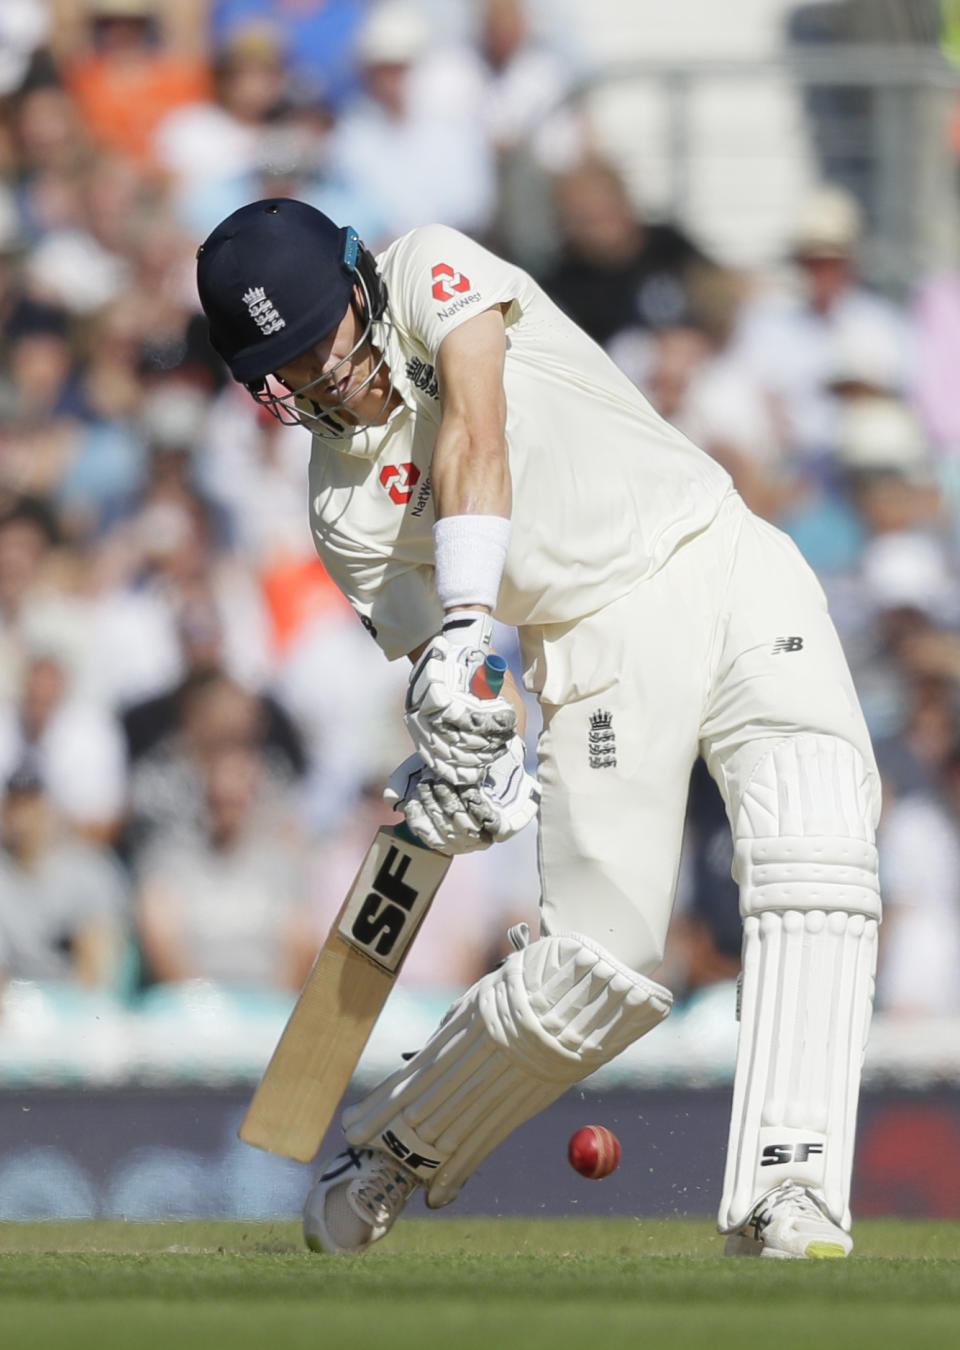 England's Joe Denly plays a shot off the bowling of Australia's Nathan Lyon during the third day of the fifth Ashes test match between England and Australia at the Oval cricket ground in London, Saturday, Sept. 14, 2019. (AP Photo/Kirsty Wigglesworth)